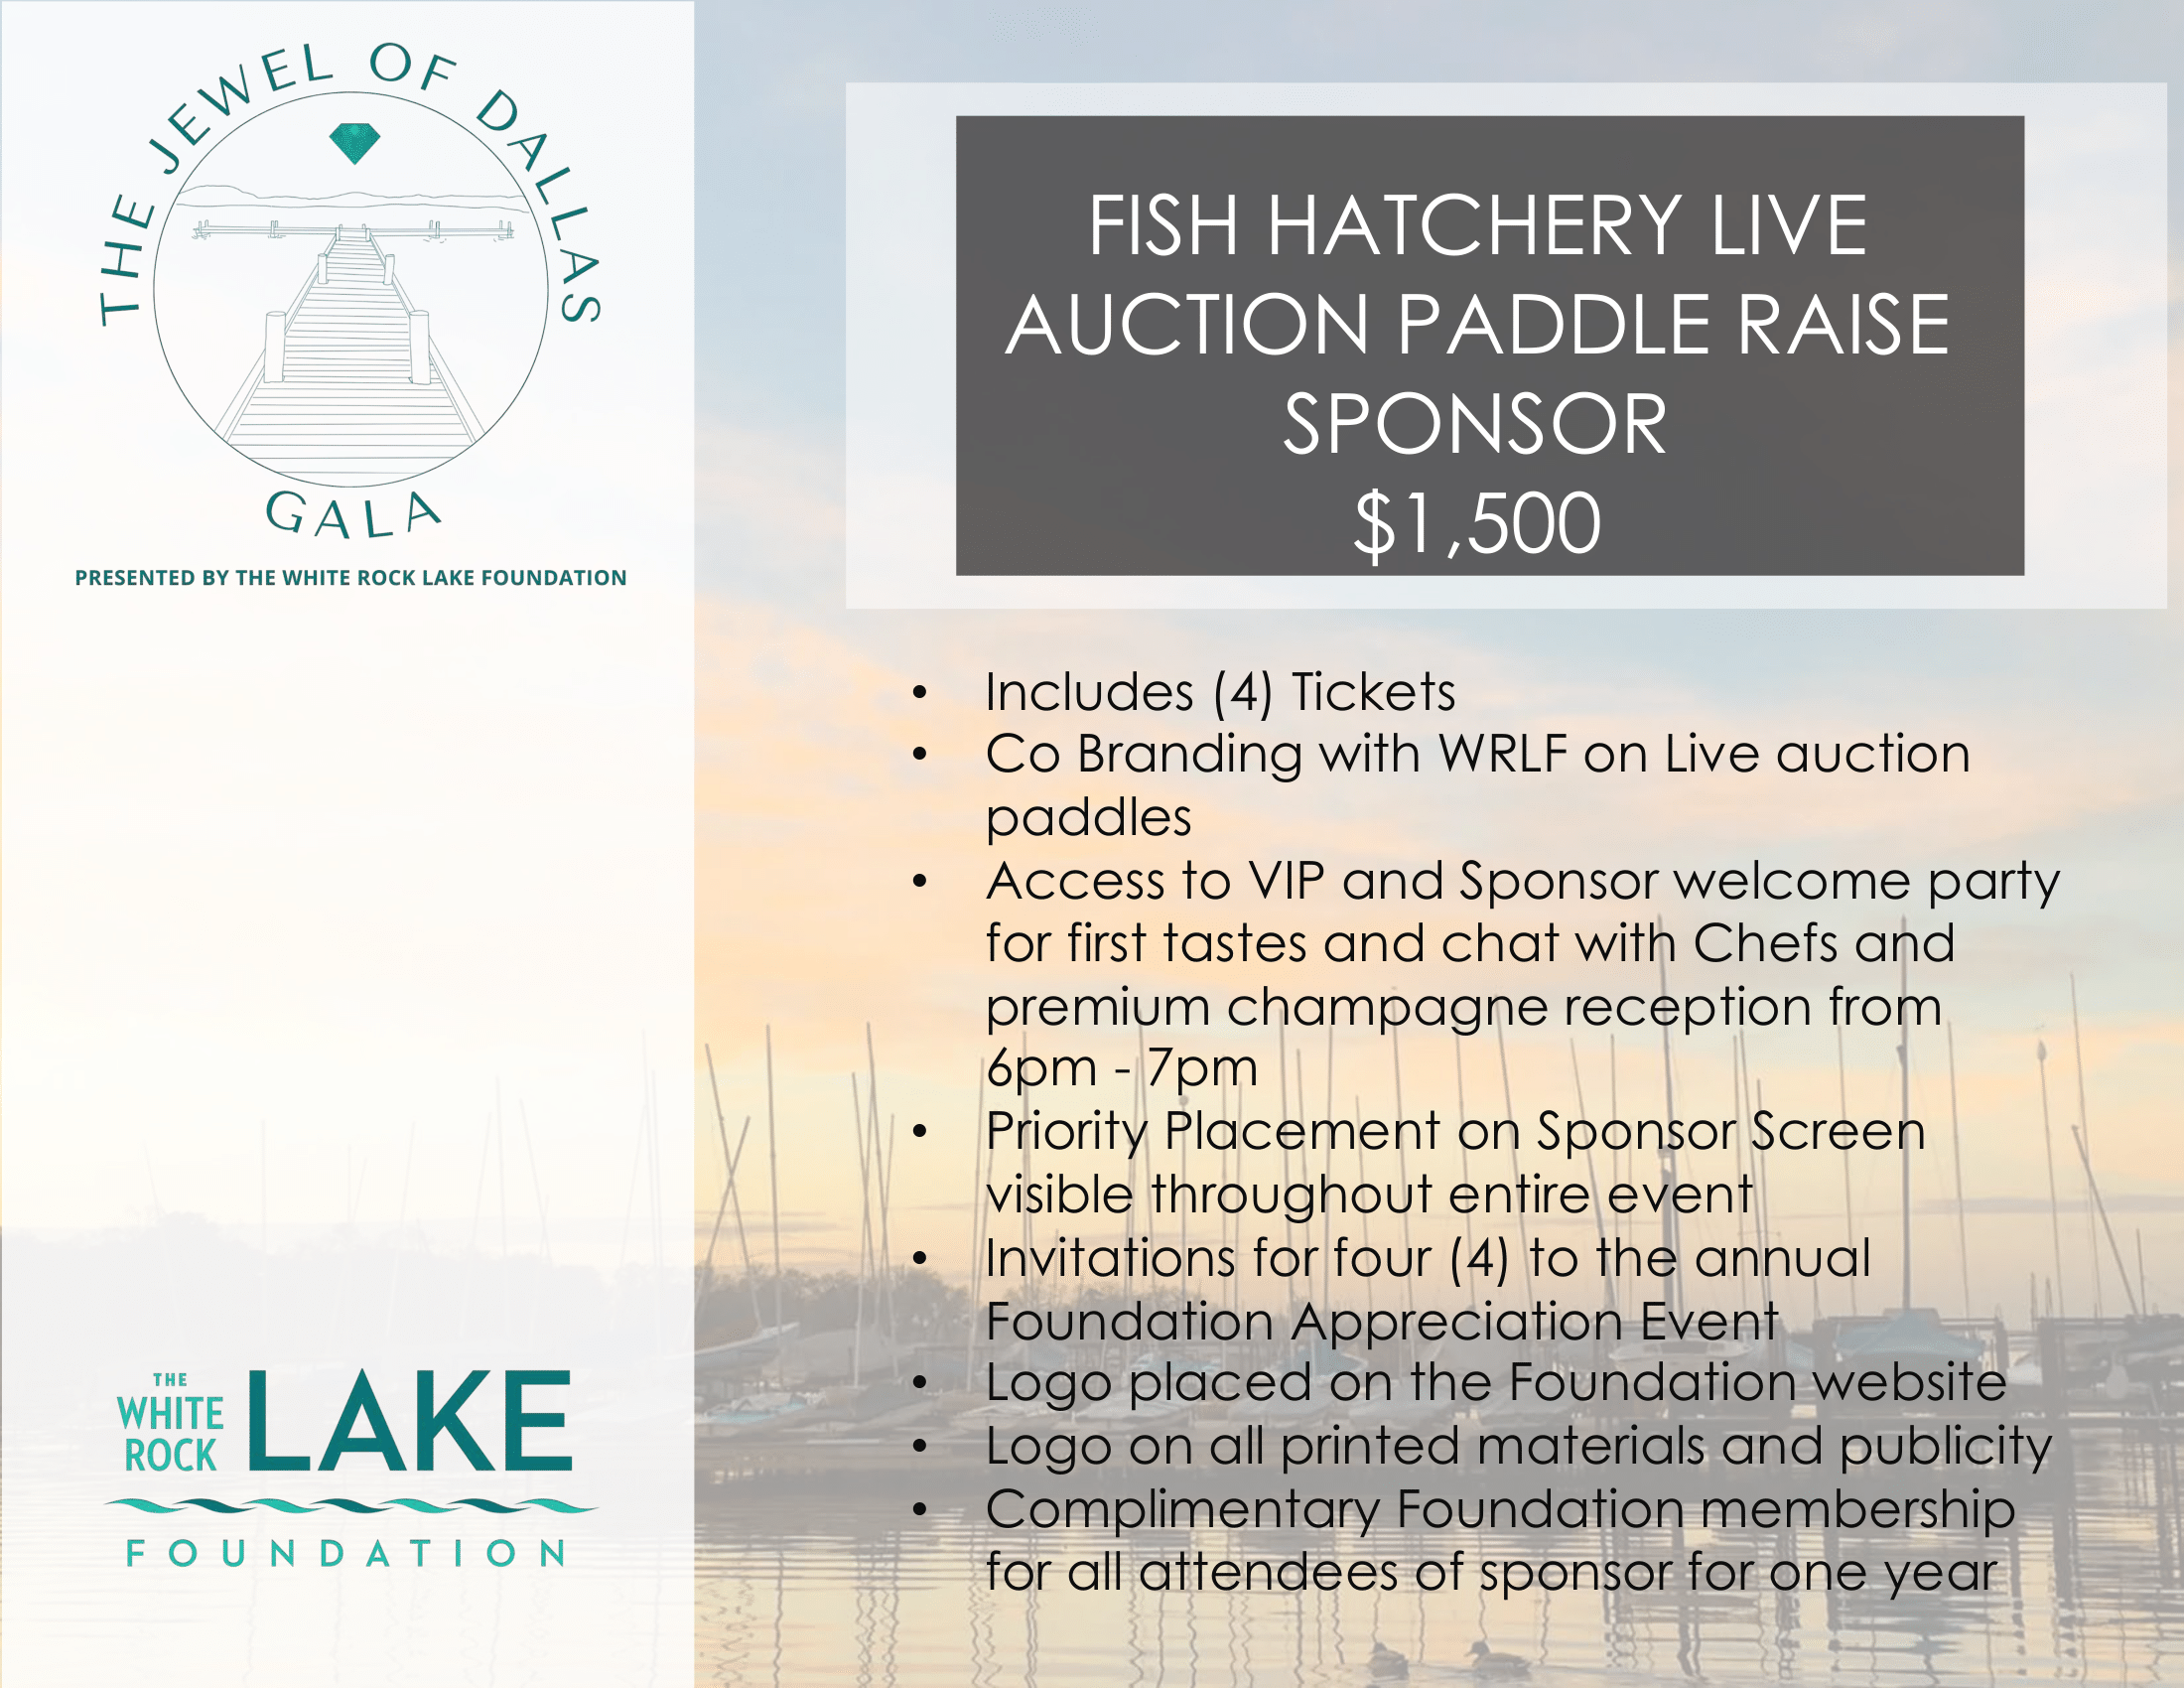 FISH HATCHERY LIVE
AUCTION PADDLE RAISE
SPONSOR
$1,500
• Includes (4) Tickets
• Co Branding with WRLF on Live auction
paddles
• Access to VIP and Sponsor welcome party
for first tastes and chat with Chefs and
premium champagne reception from
6pm - 7pm
• Priority Placement on Sponsor Screen
visible throughout entire event
• Invitations for four (4) to the annual
Foundation Appreciation Event
• Logo placed on the Foundation website
• Logo on all printed materials and publicity
• Complimentary Foundation membership
for all attendees of sponsor for one year